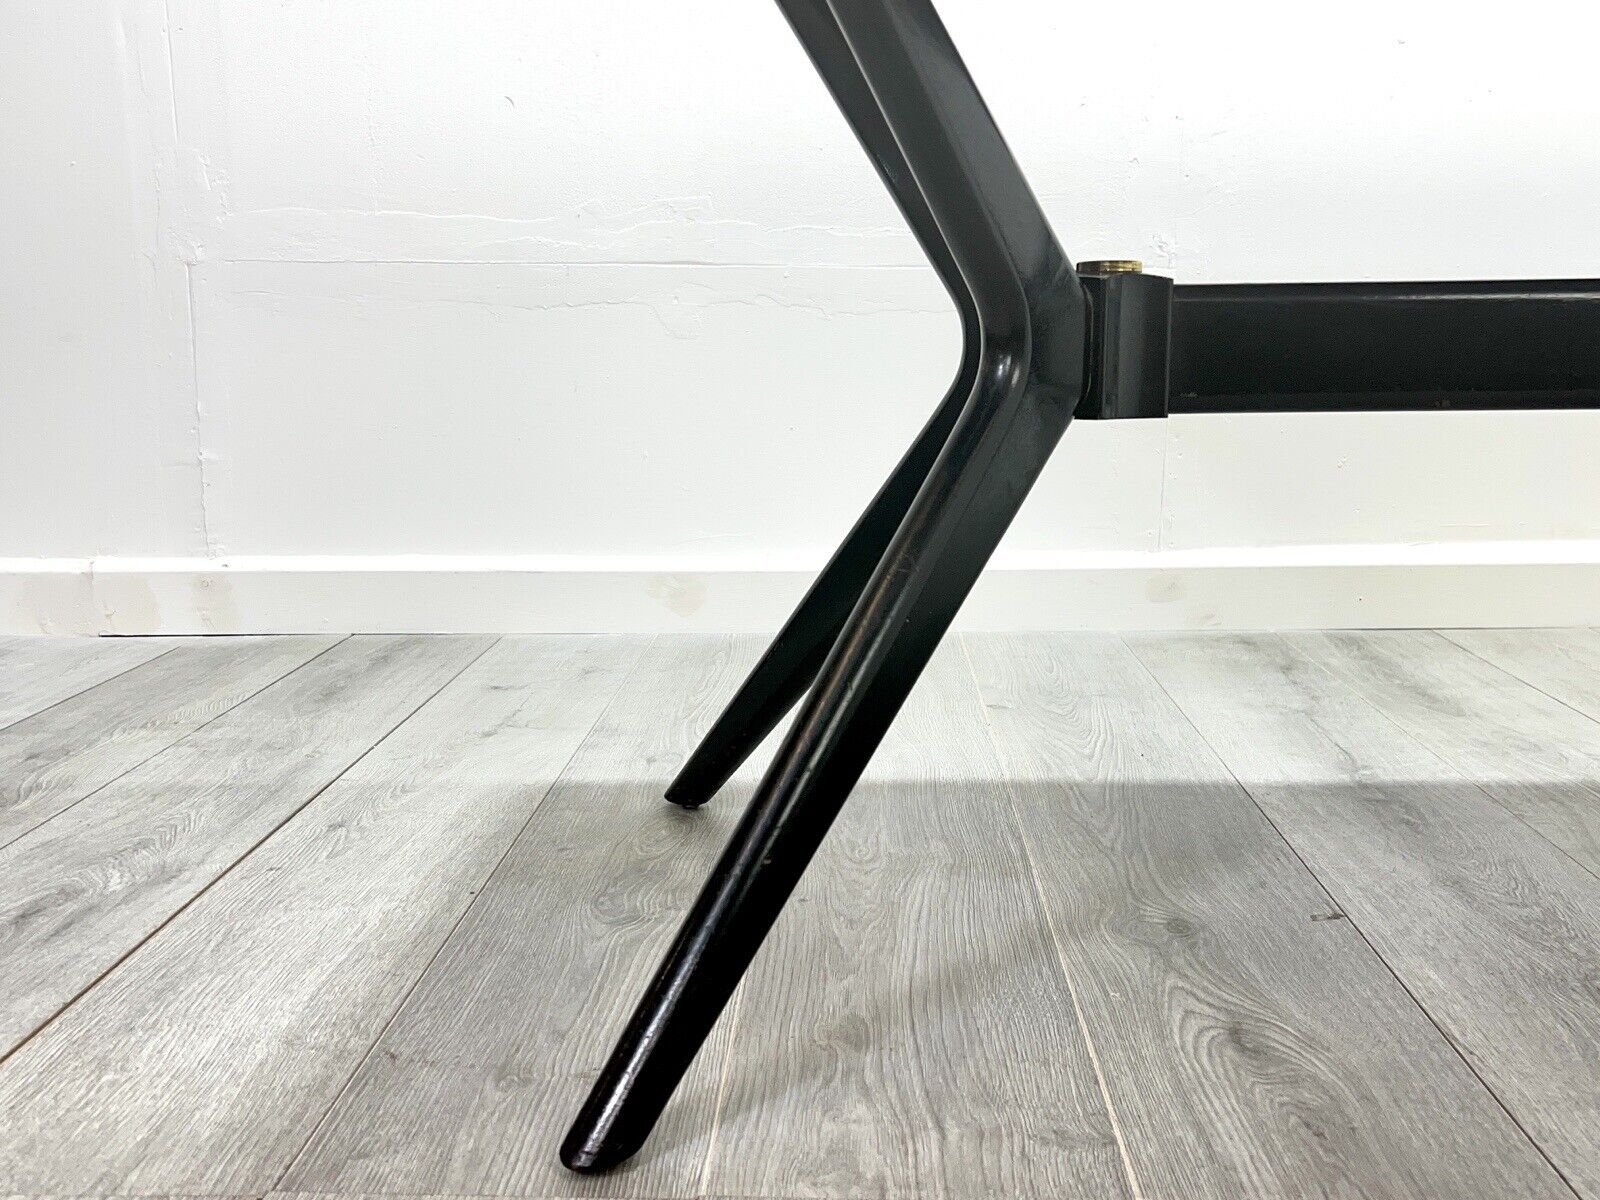 G Plan / E Gomme, Mid Century Tola / Helicopter Dining Table